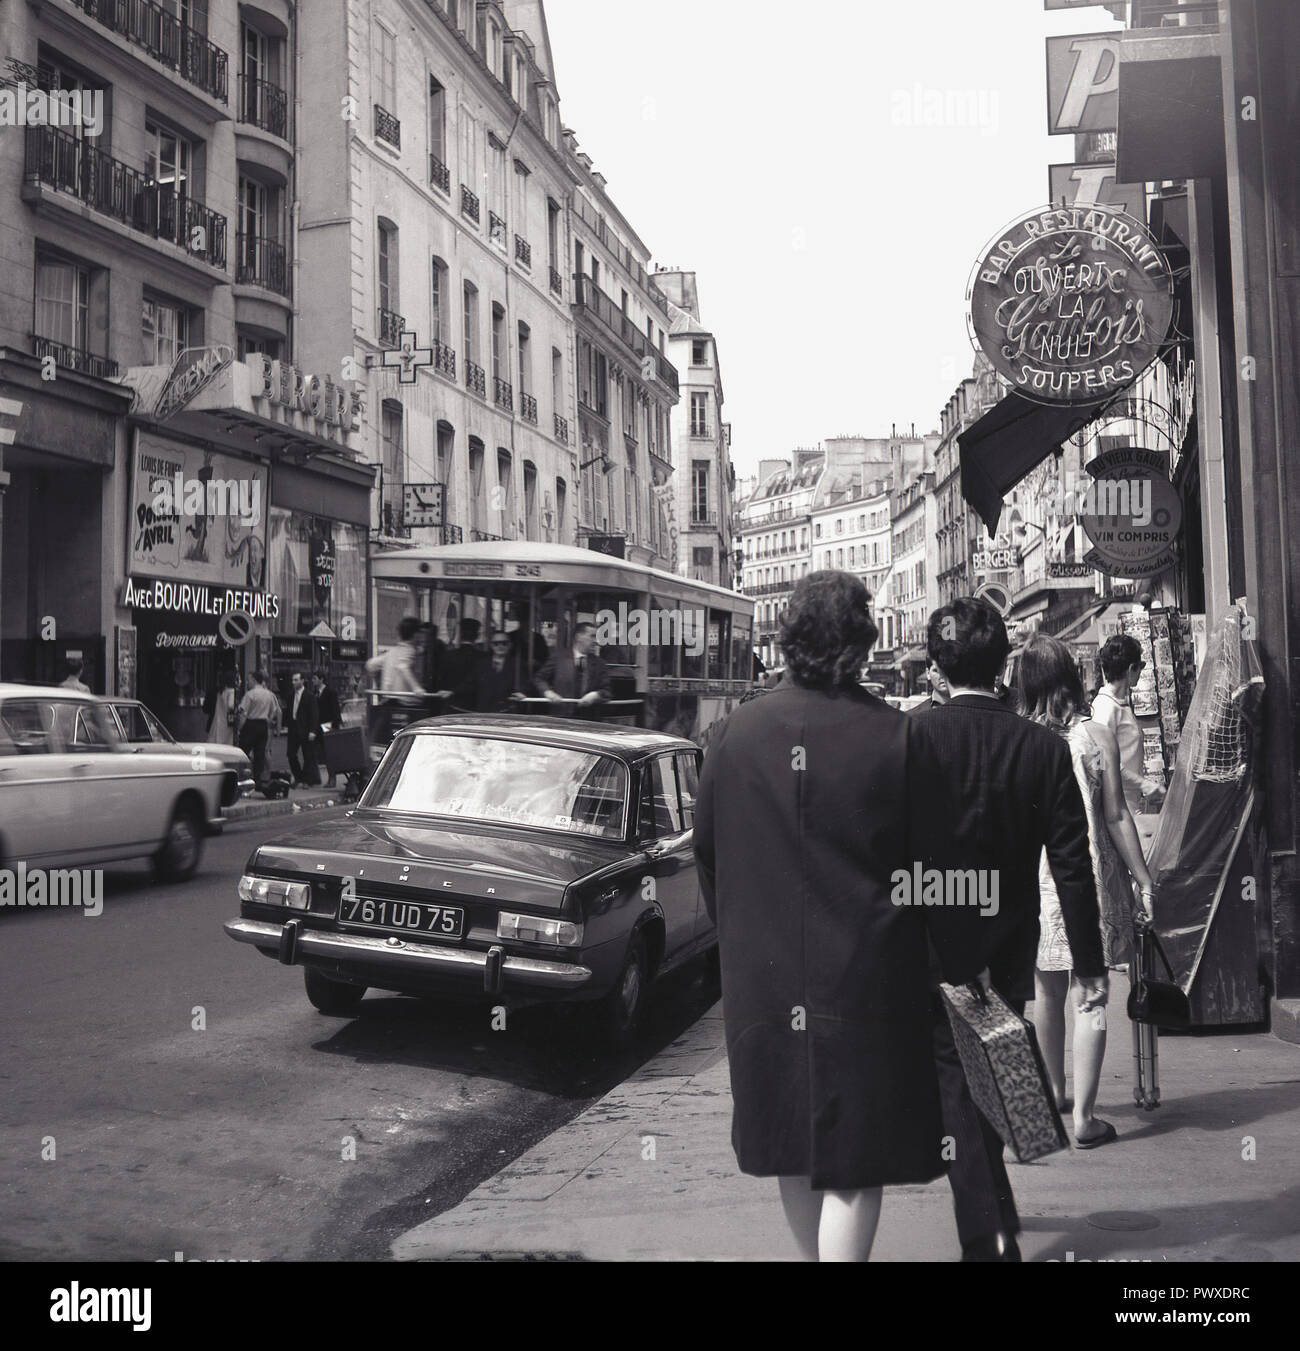 1954, historical, busy street in Paris, France, rue richer with the Bergere cinema, showing the french comedy film, 'April Fool's Day' or 'Poisson d'Avril', staring Andre Bourvil and Louis de Funes. Stock Photo